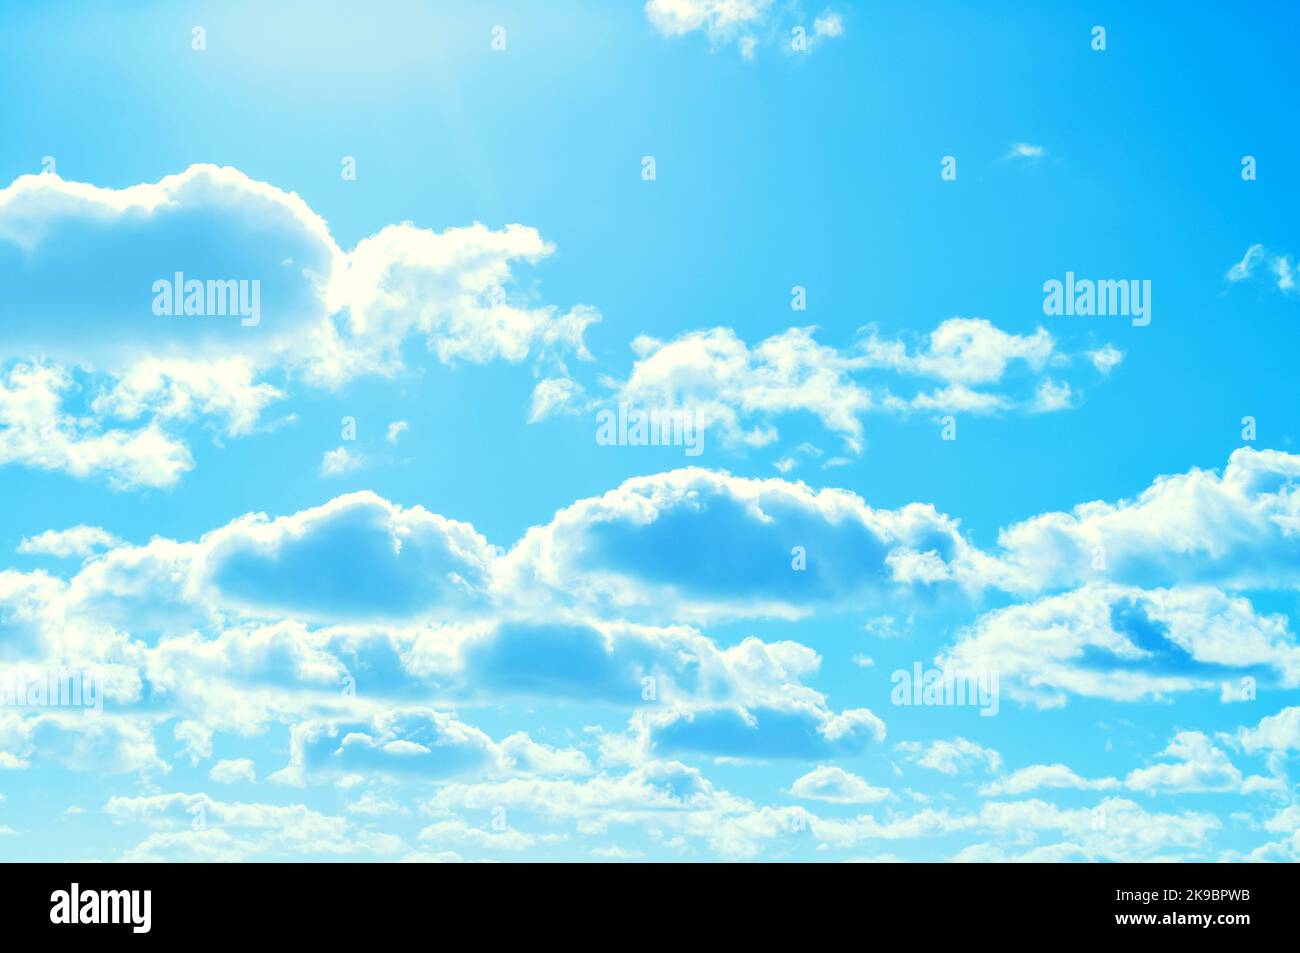 Sky background, bright blue sky landscape with dramatic clouds,creative tones applied Stock Photo